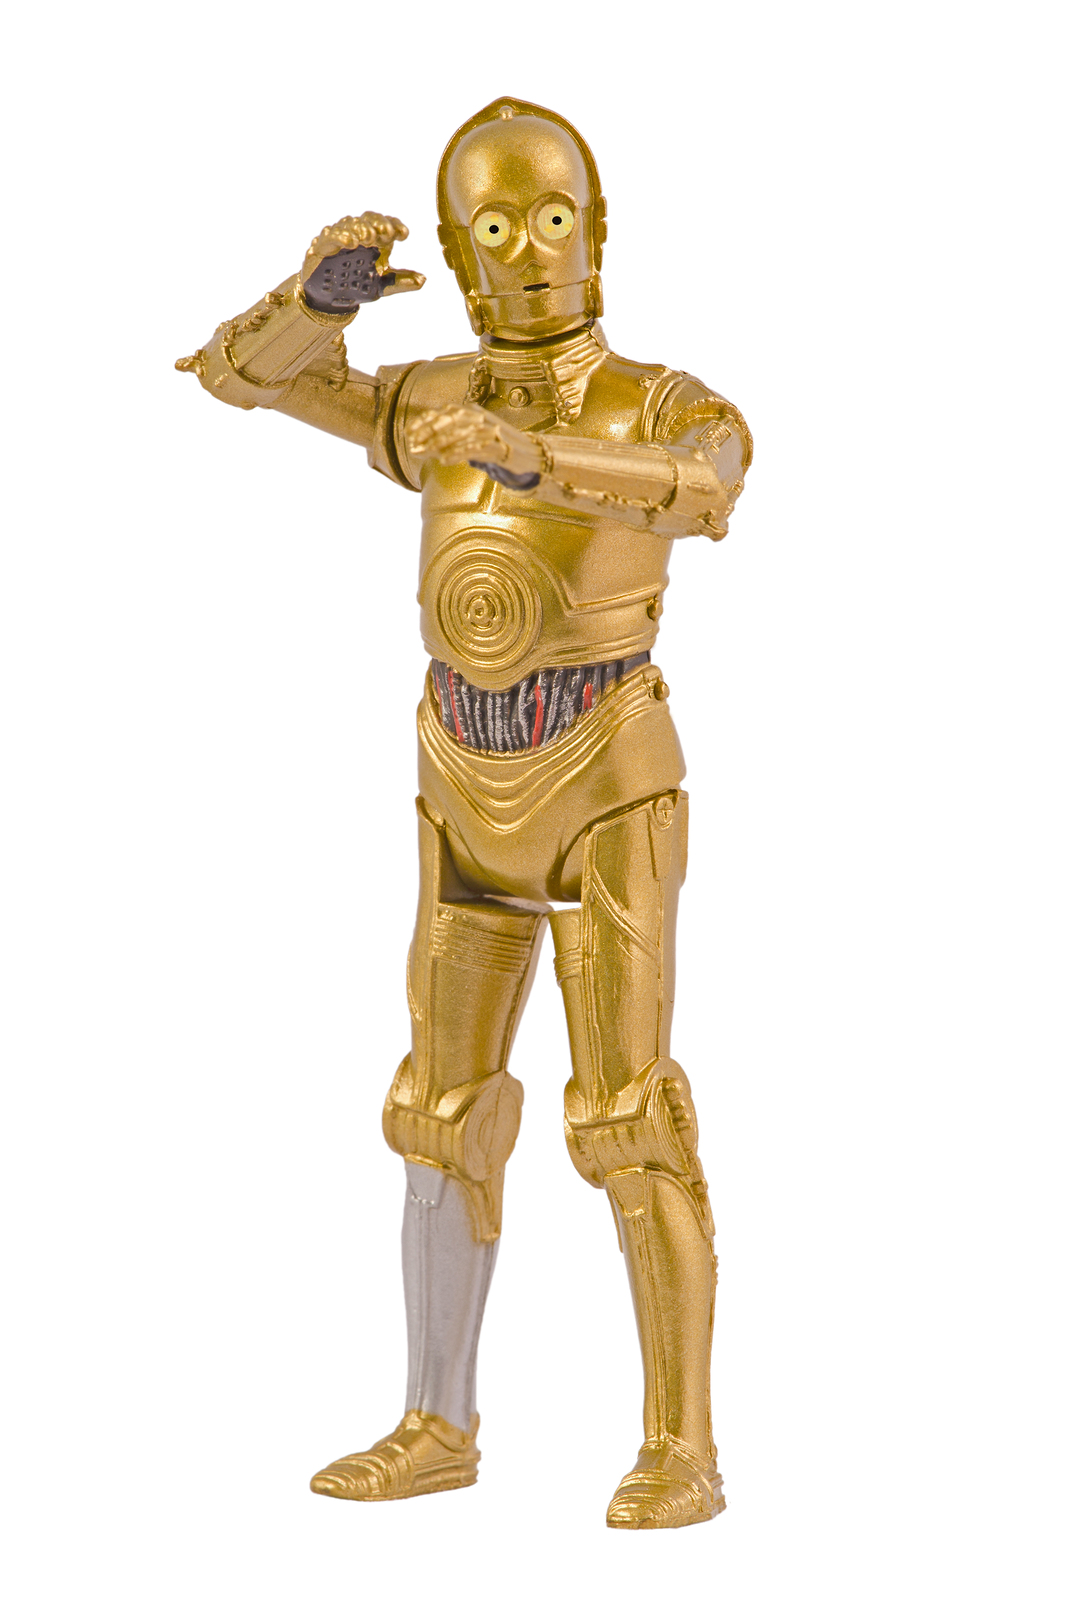 Komrom, Hungary - 16th September 2014: There is a plastic C-3PO action figure in the photo. This version of the droid performed in the following Star Wars movies: Episode III, IV, V, VI. This figure made by Hasbro.